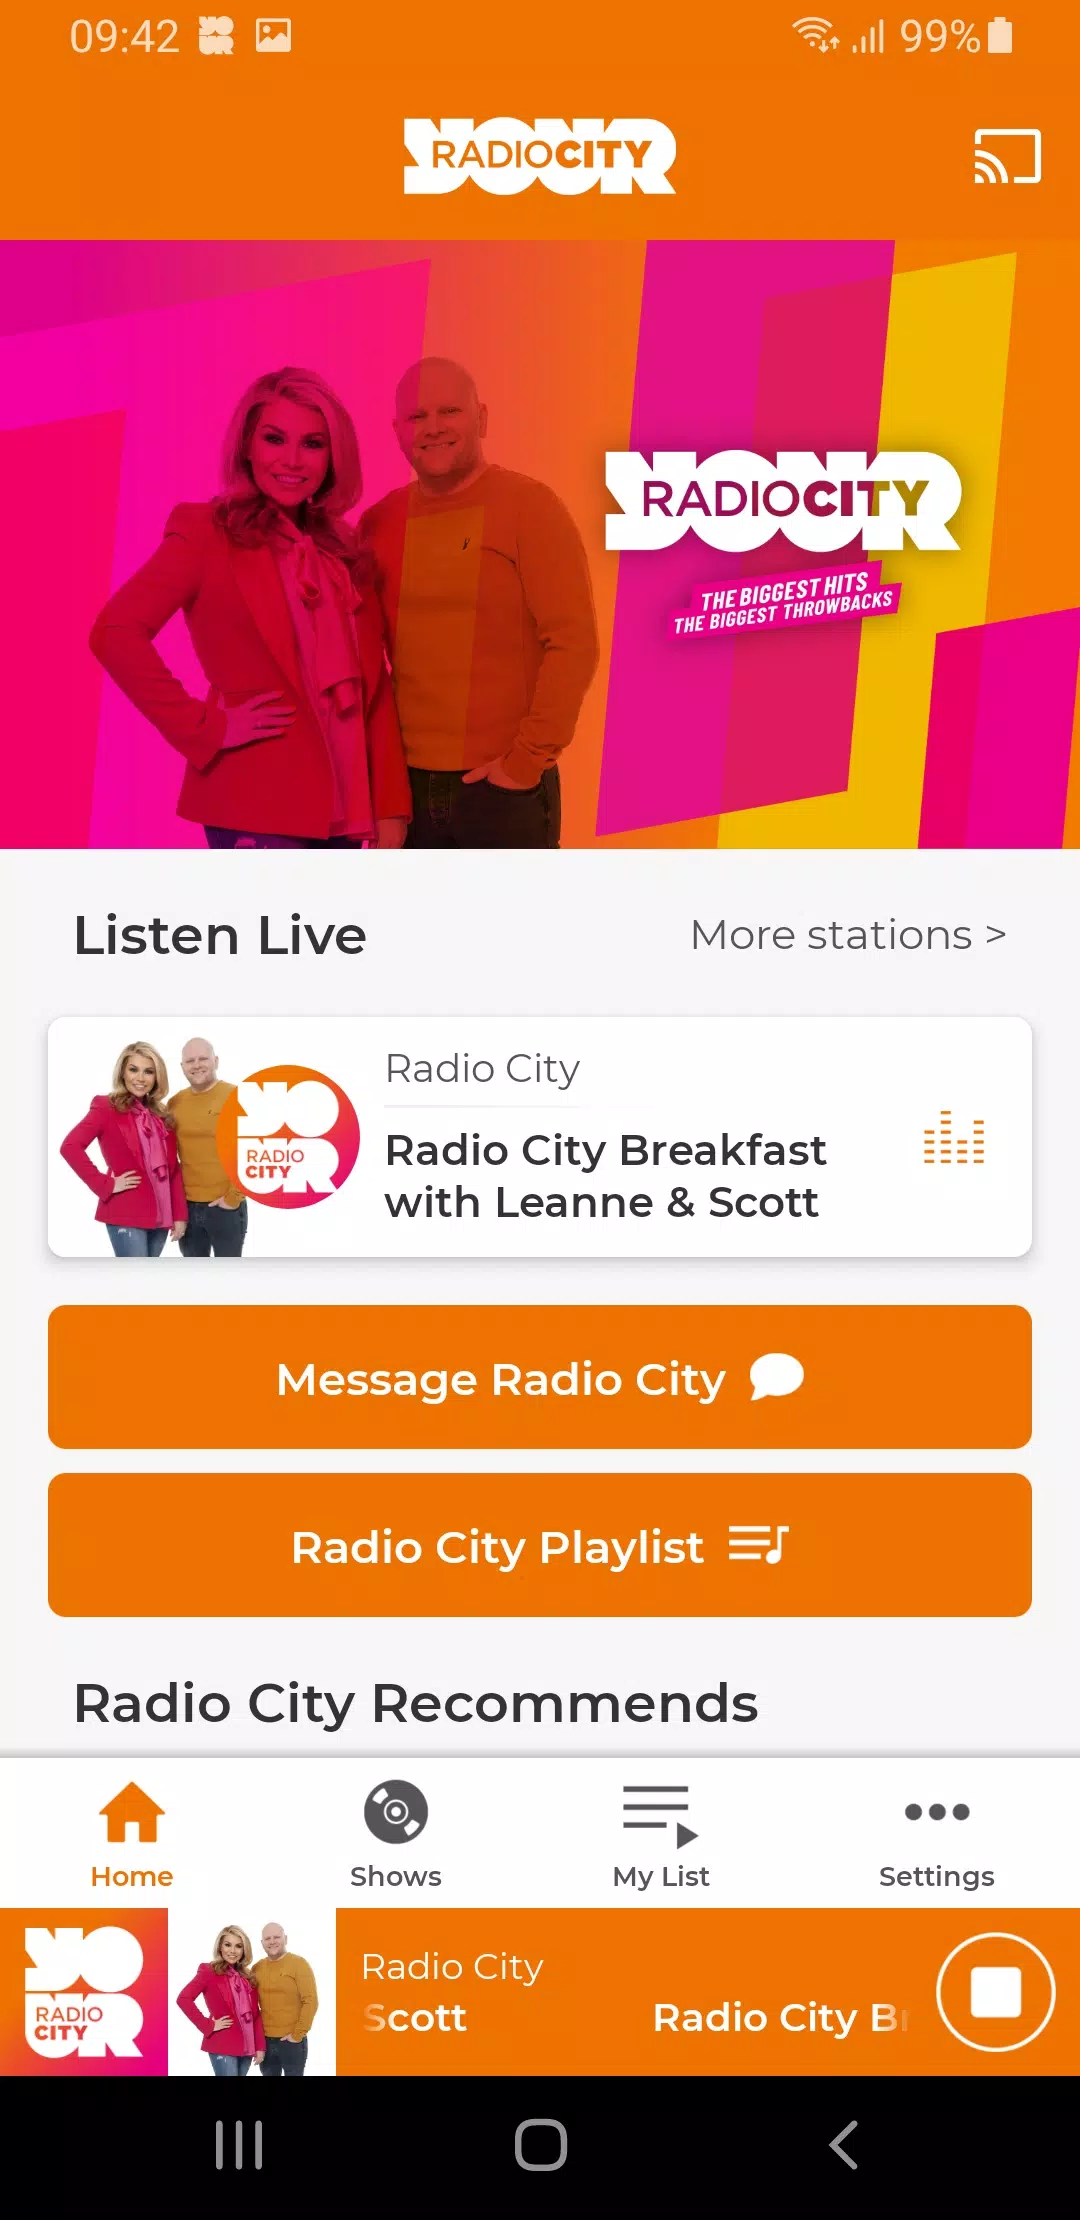 Radio City for Android - APK Download